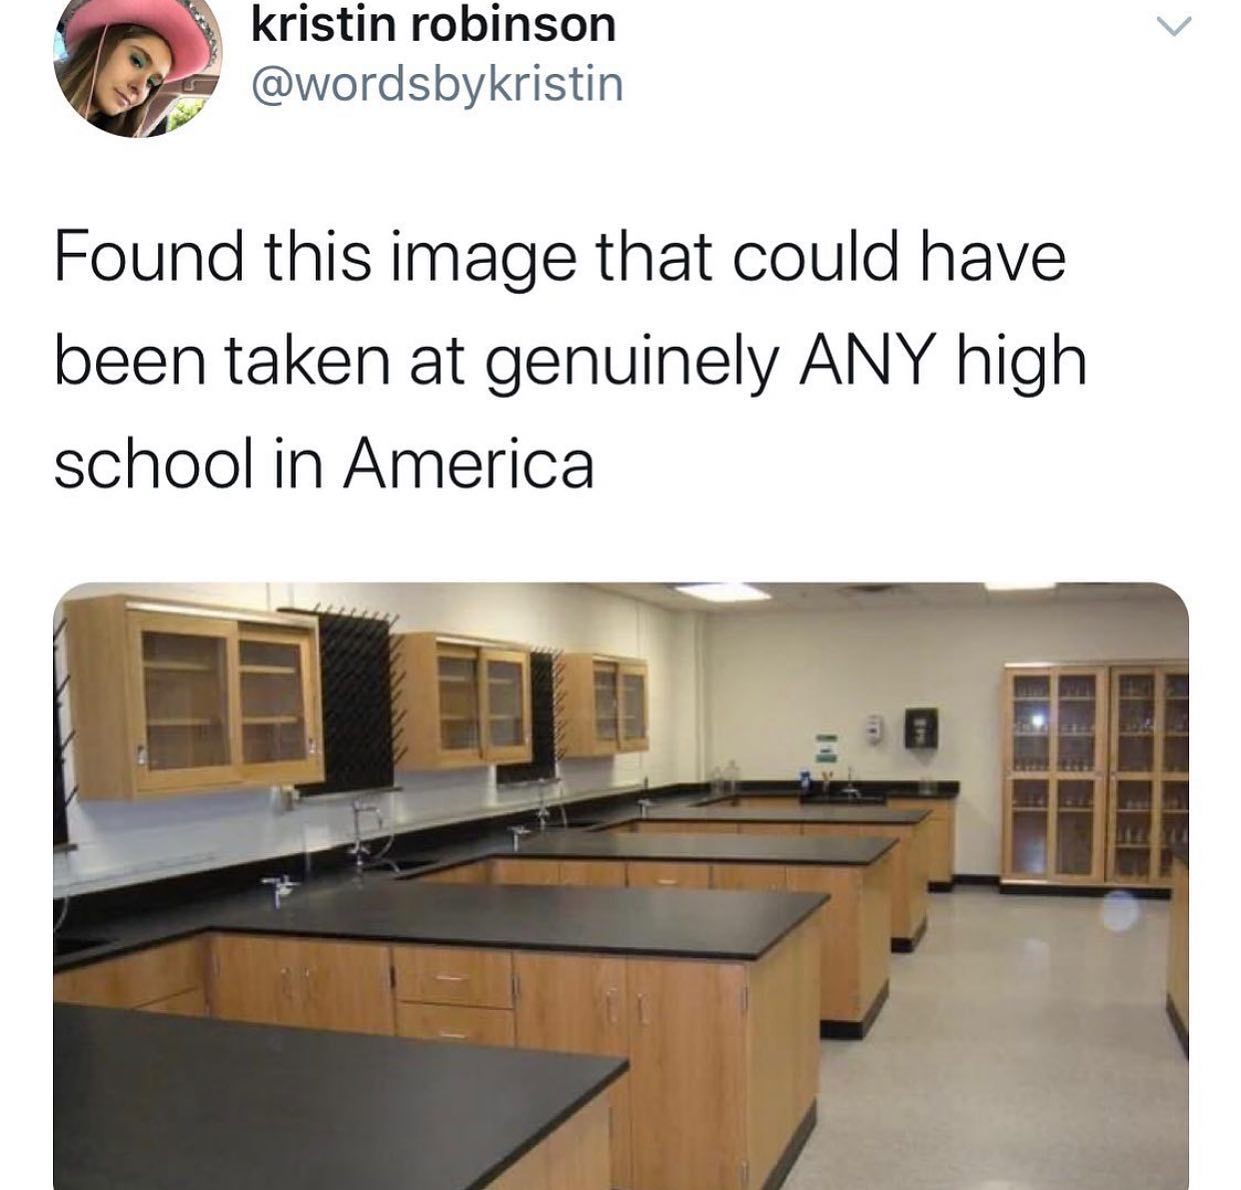 dank memes - table - kristin robinson Found this image that could have been taken at genuinely Any high school in America